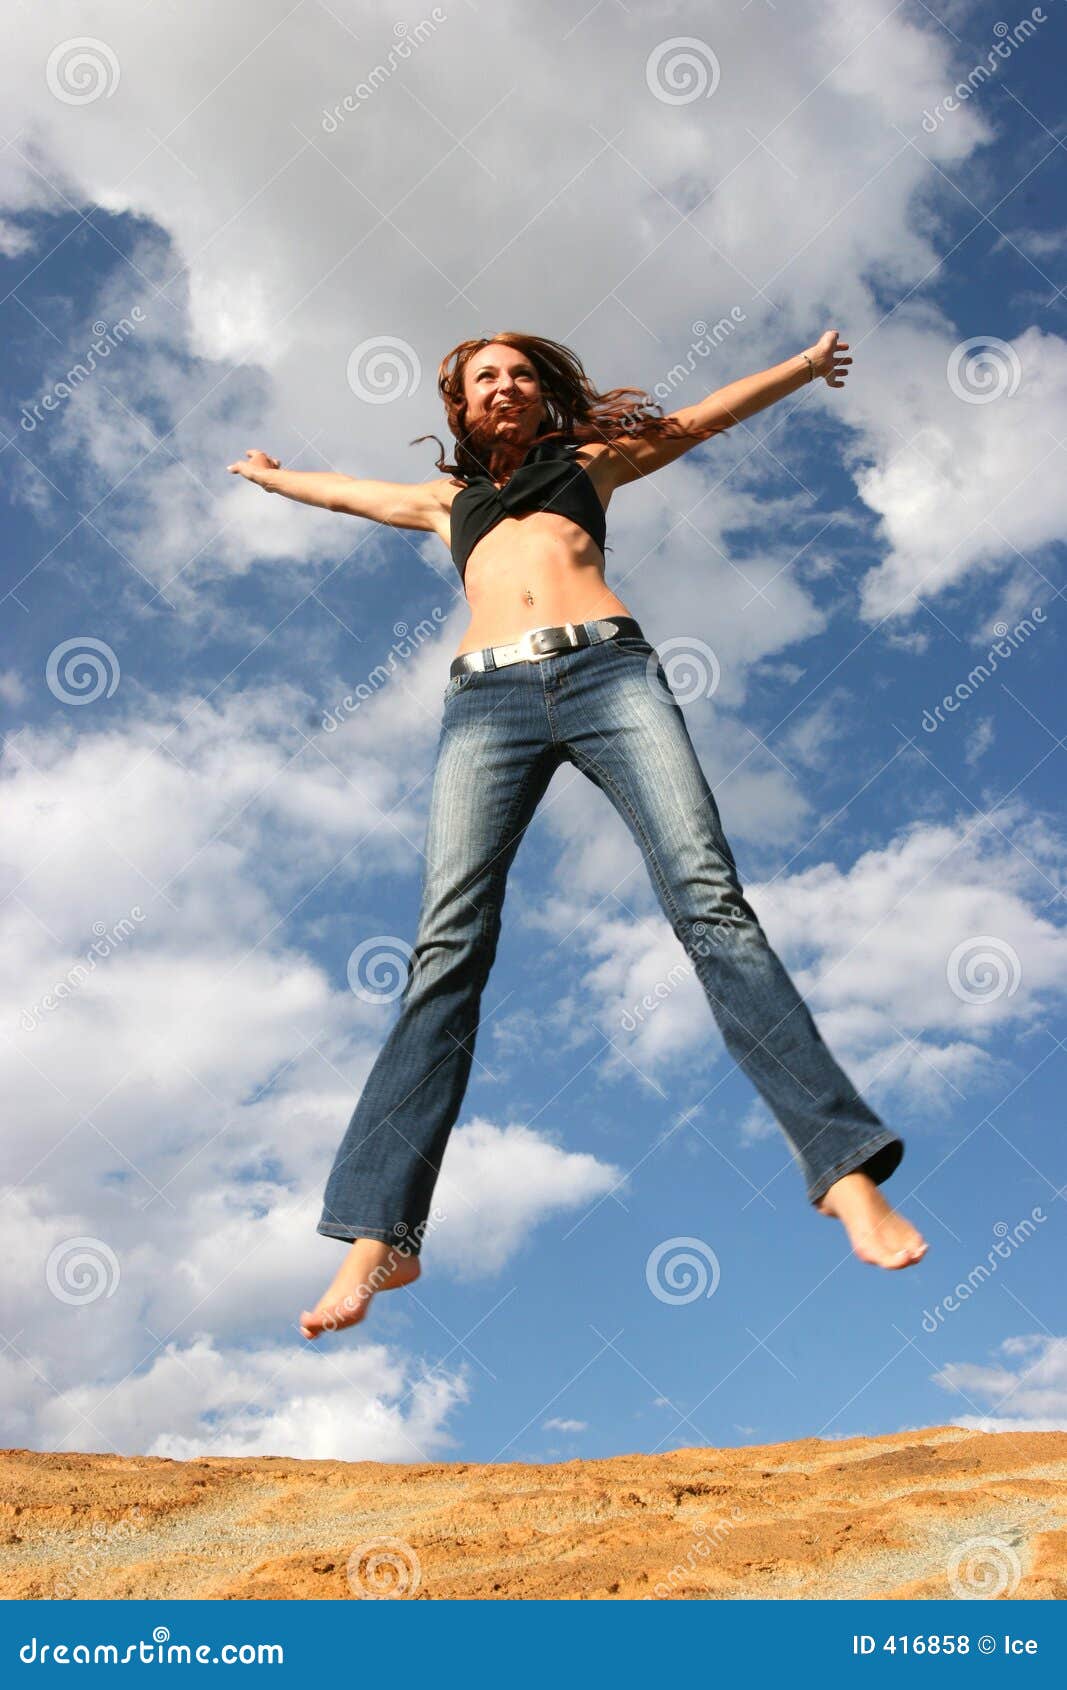 clipart woman jumping for joy - photo #41